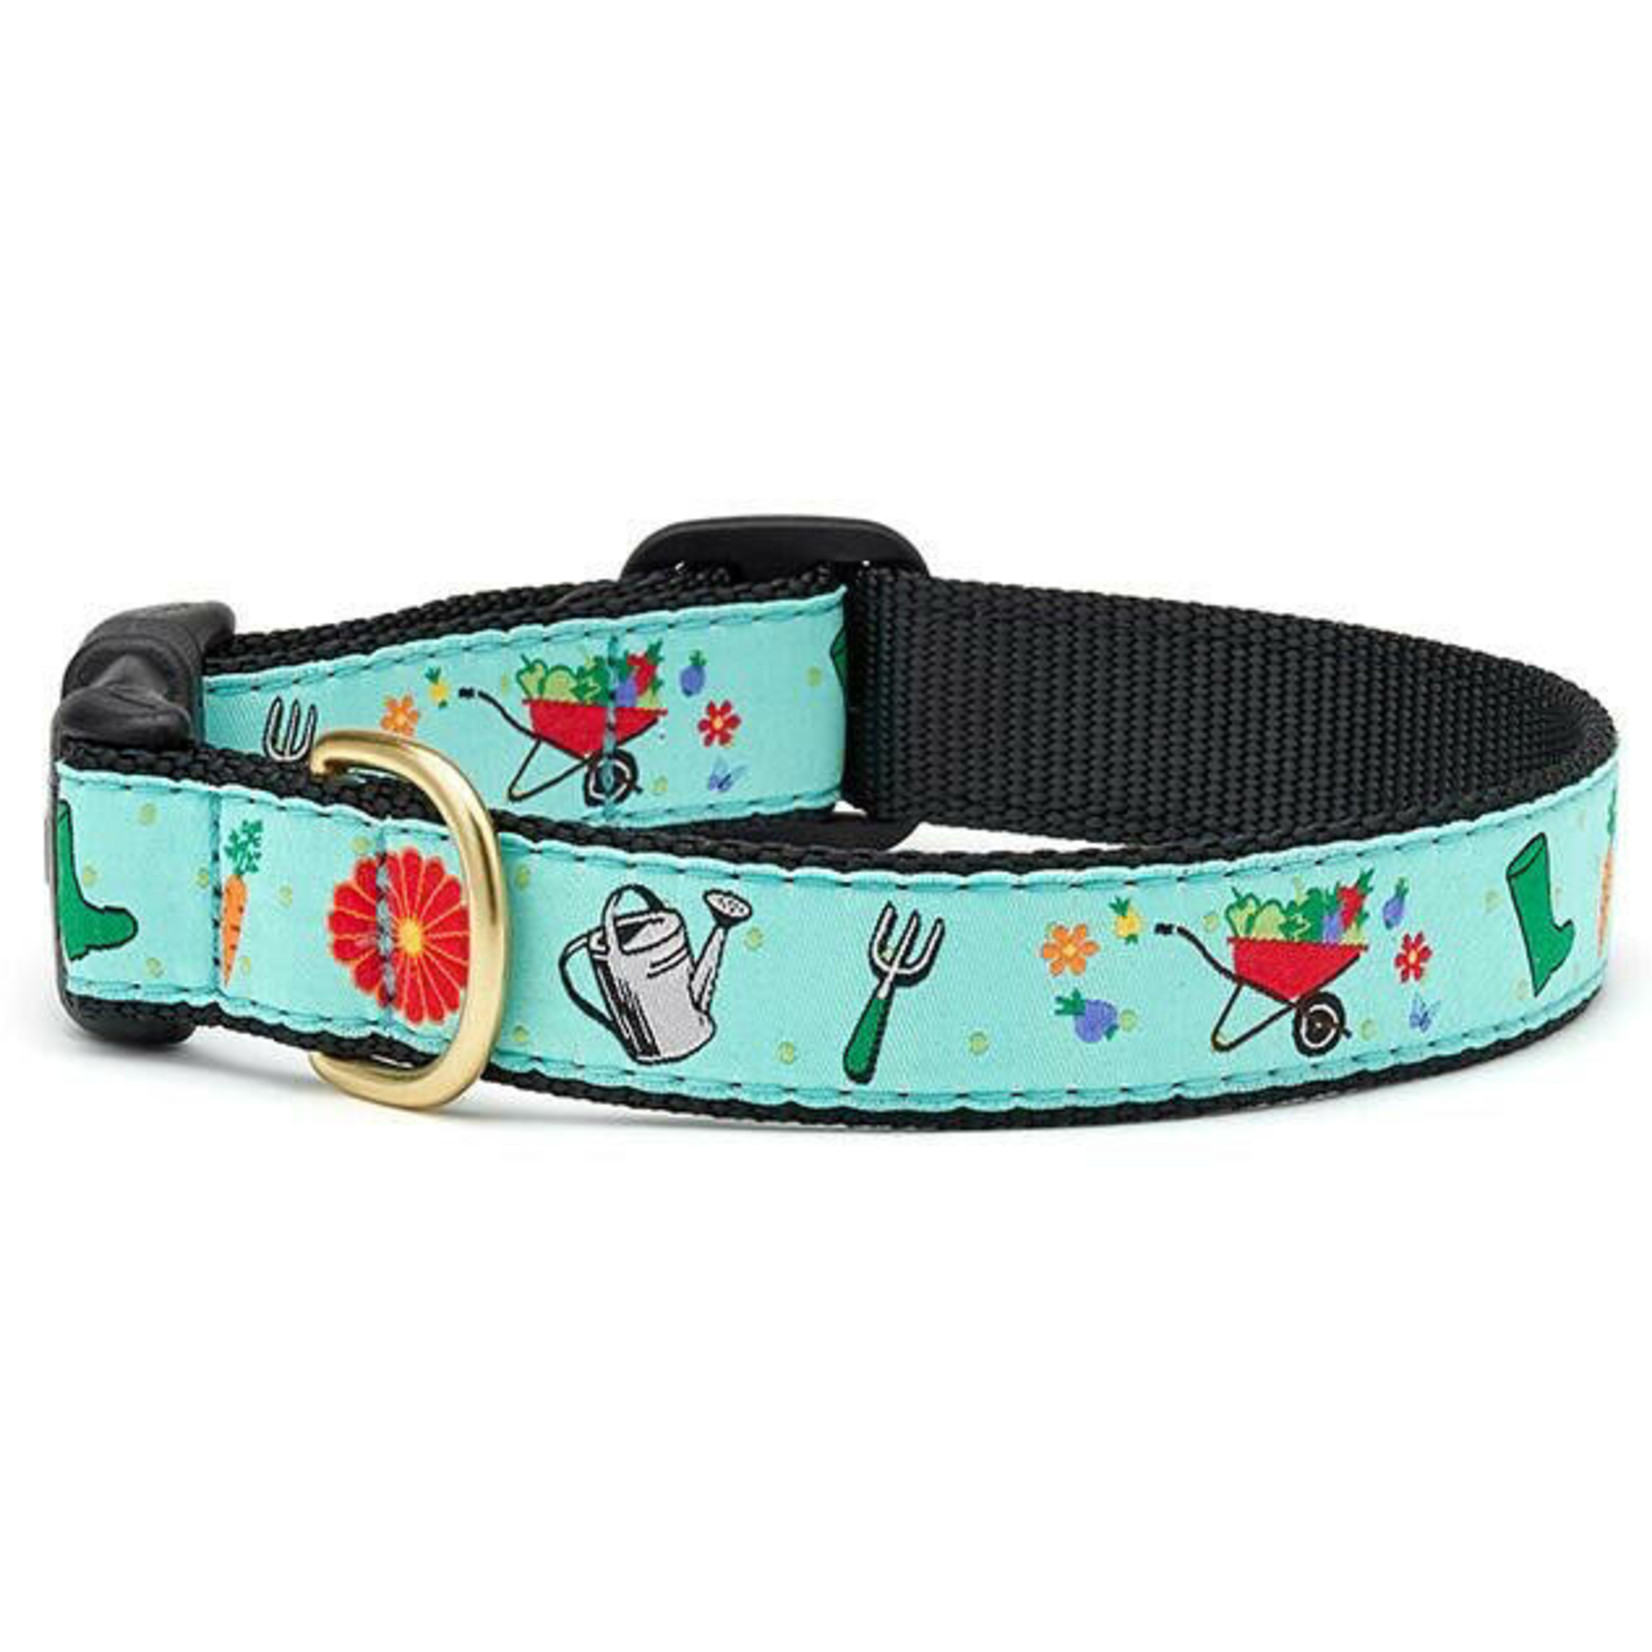 Up Country UPCOUNTRY Garden Pawty Dog Collar - FINAL SALE, No Exchanges or Refunds